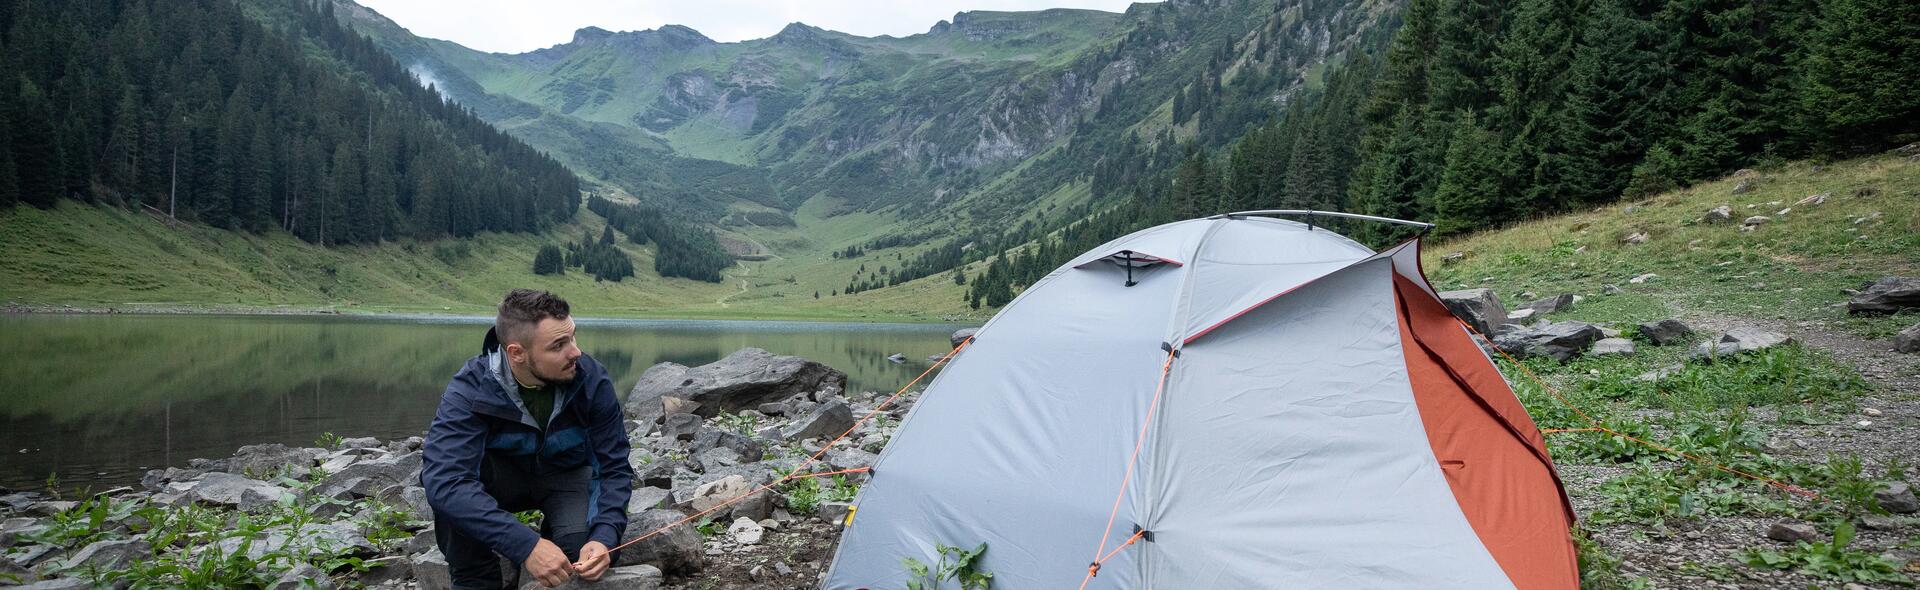 1 TO 3-PERSON POLE TENTS | DECATHLON AFTERSALES SERVICE